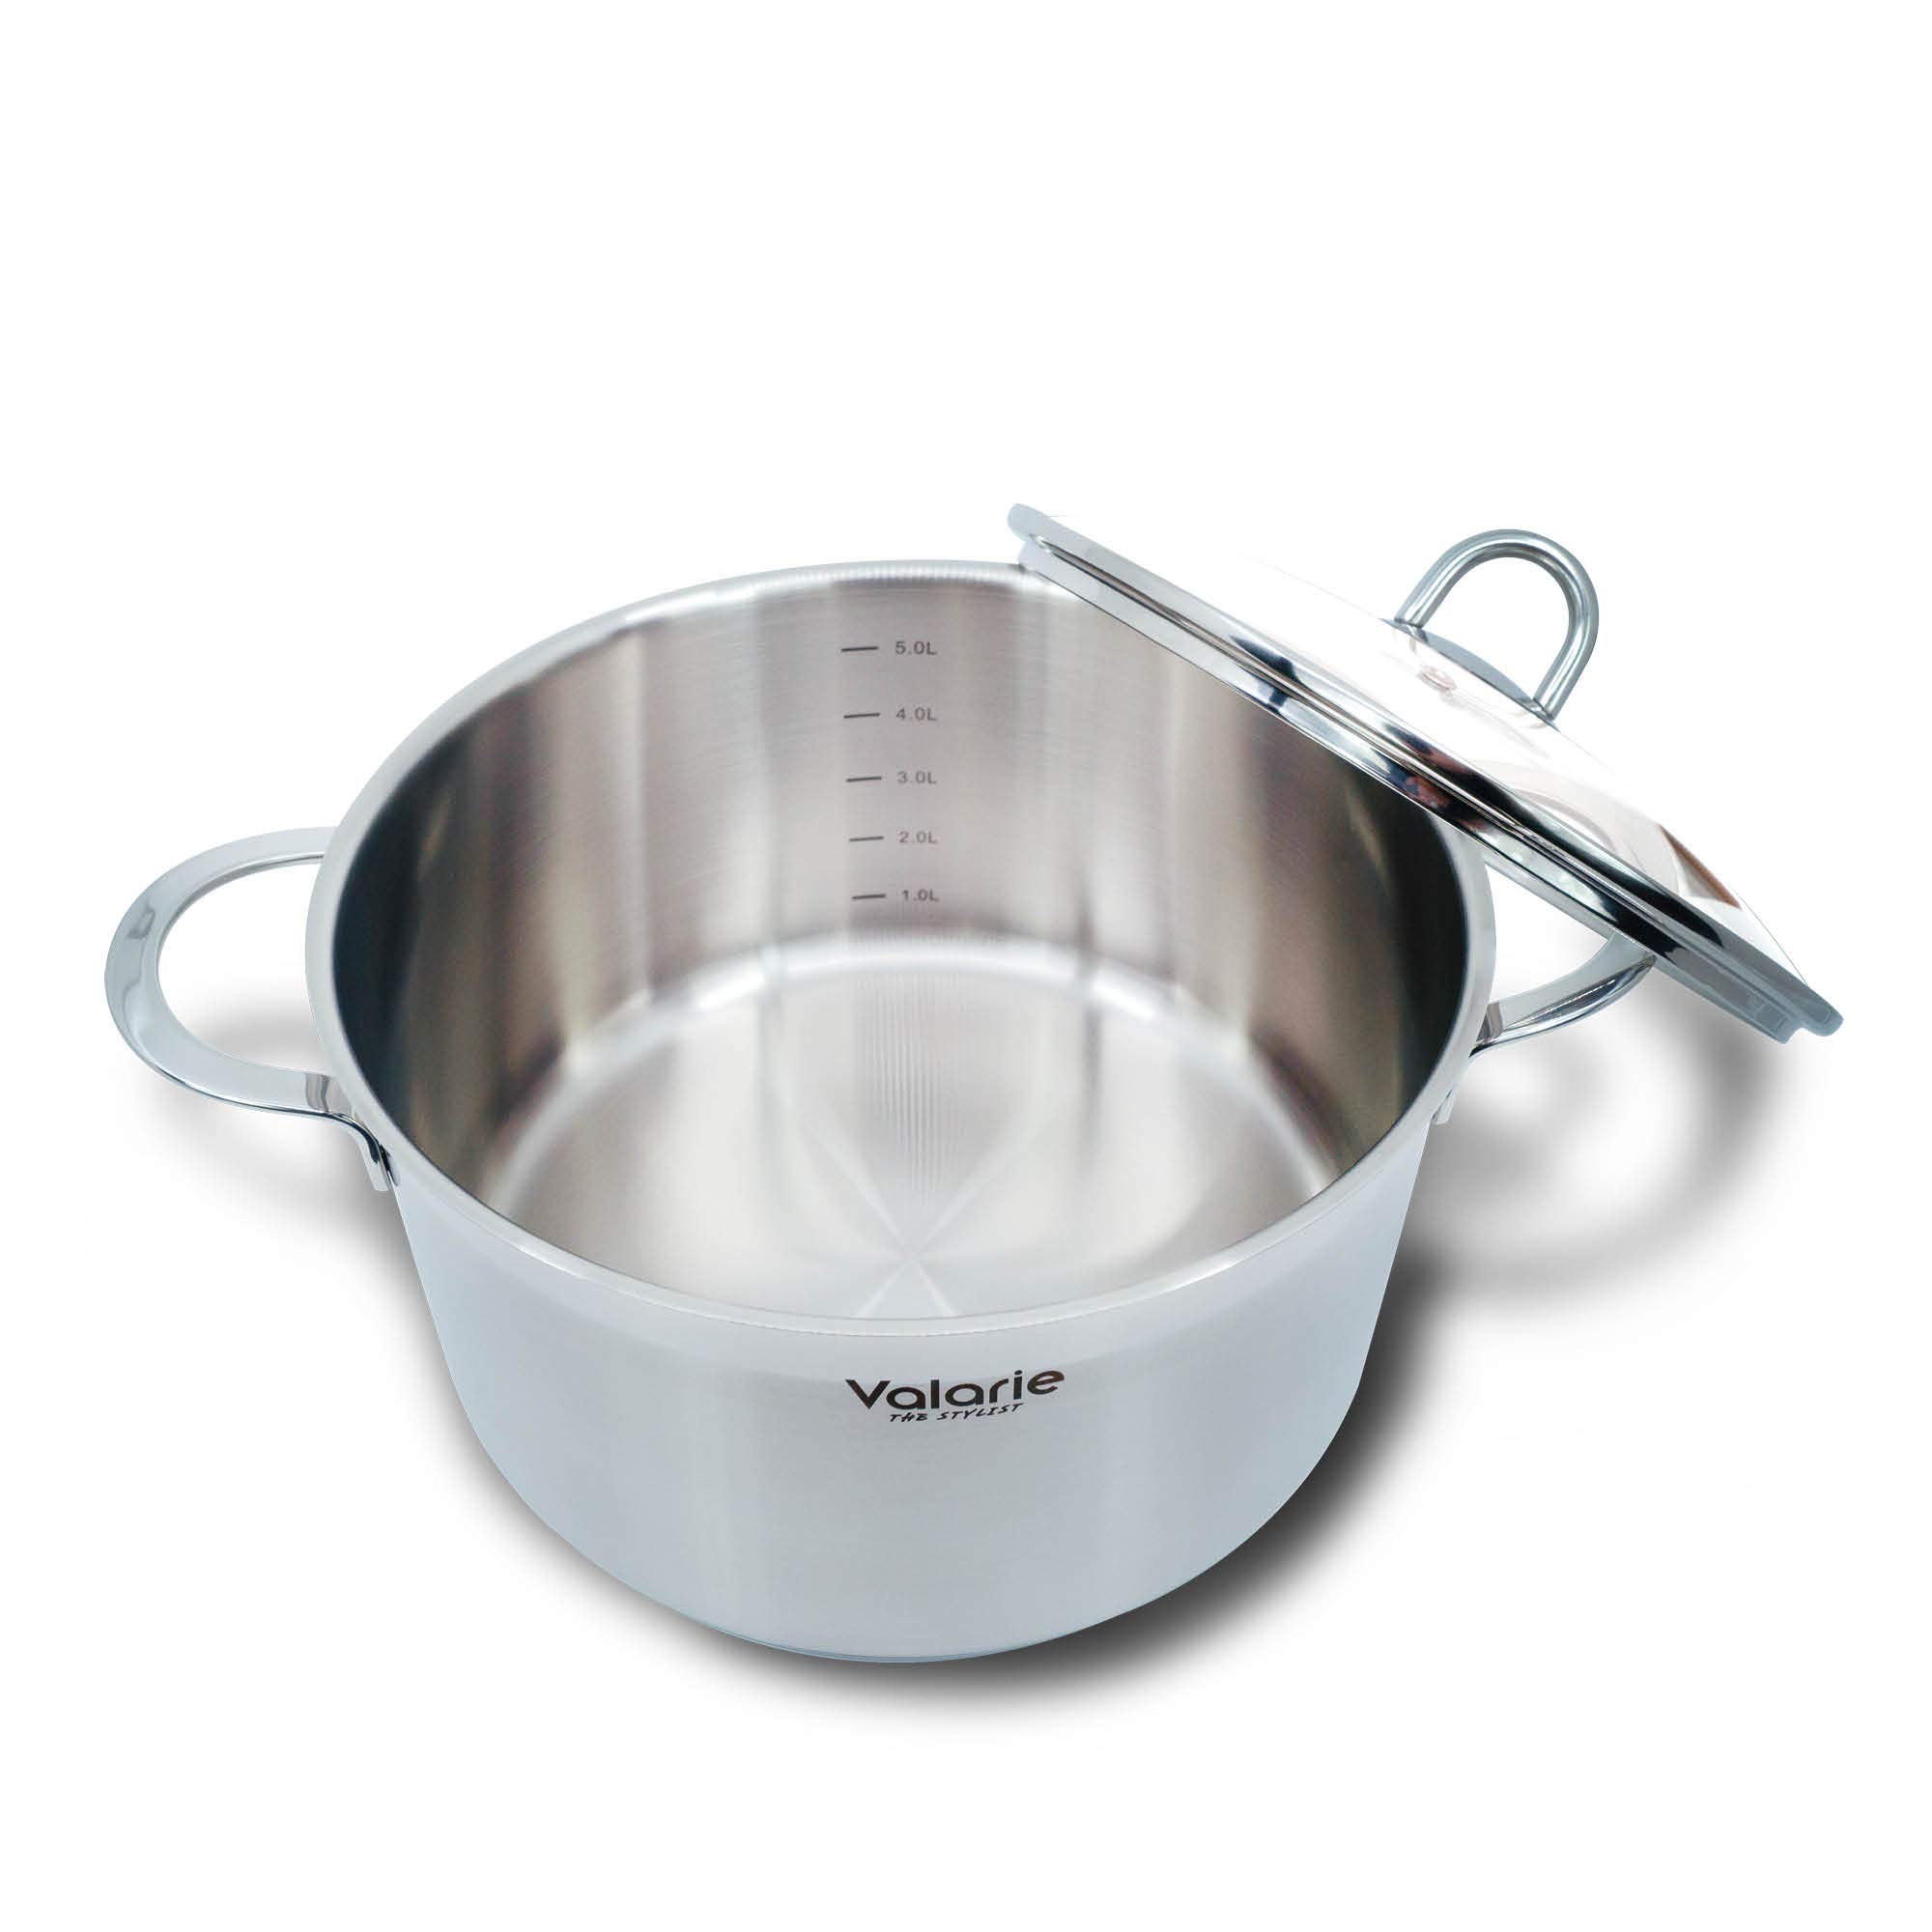 Valarie Korean Tri-Ply Aluminum Stainless Steel Cookware 24 CM 5.9-Quart QT Stockpot with Glass Lid, Multipurpose Use for Home Kitchen or Restaurant, Induction Cooker Compatible